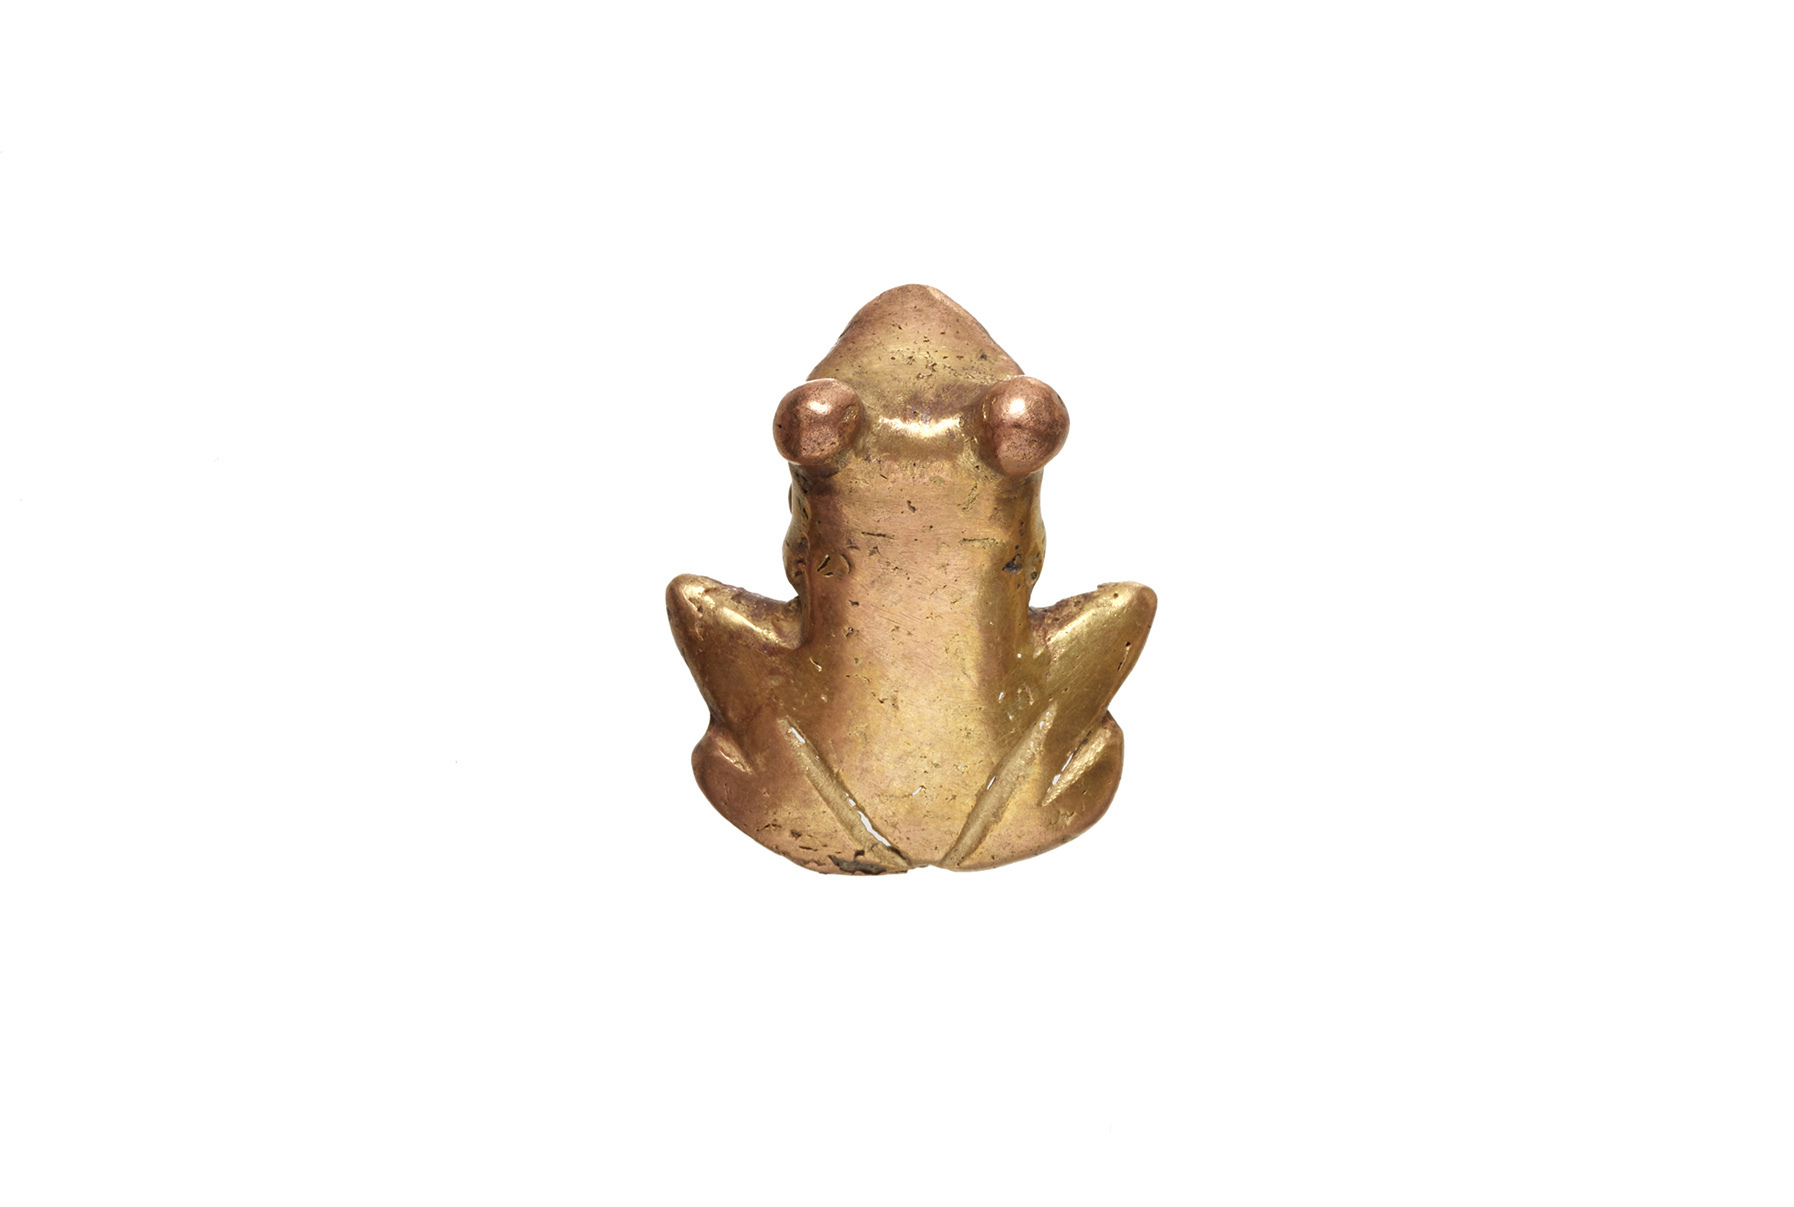 Tairona Gold and Tumbaga Ornament in the Form of a Frog